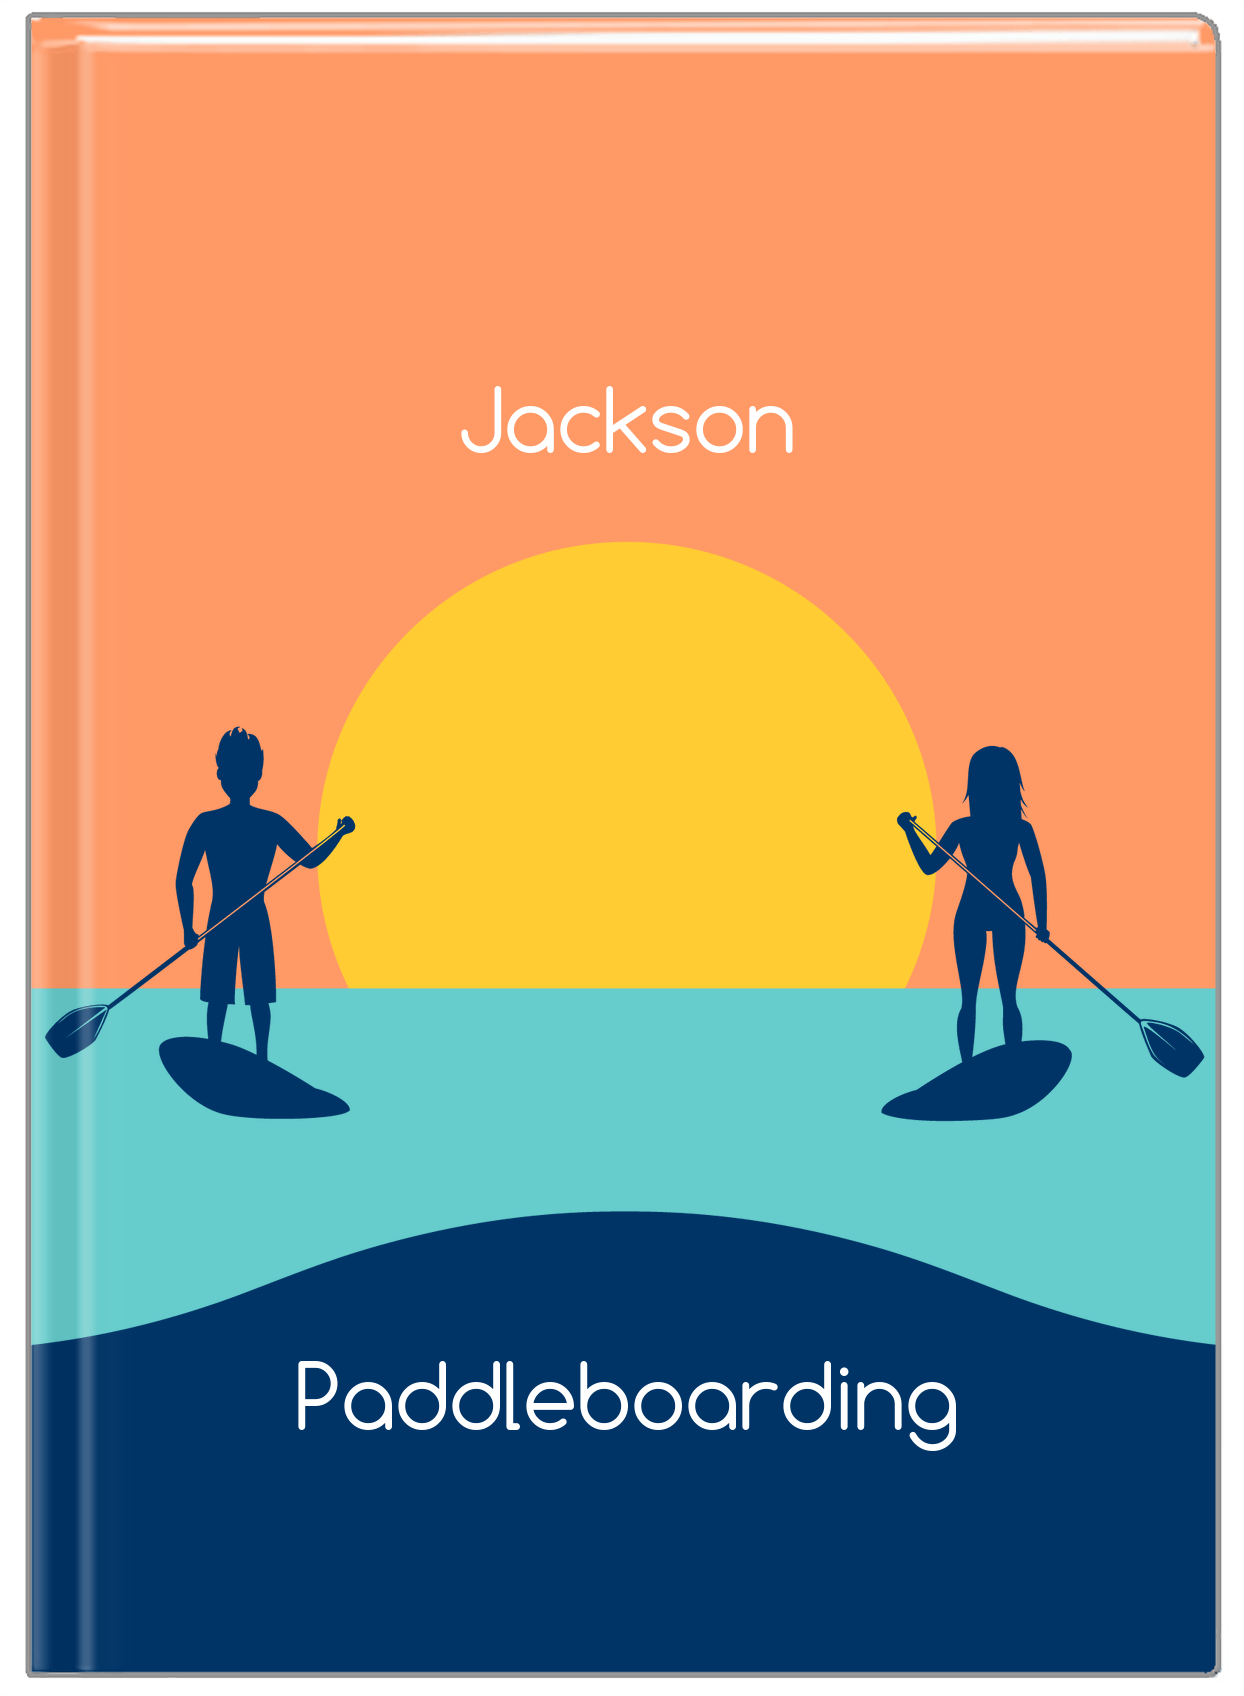 Personalized Beach Journal XI - Paddleboarding - Orange Background - Front View